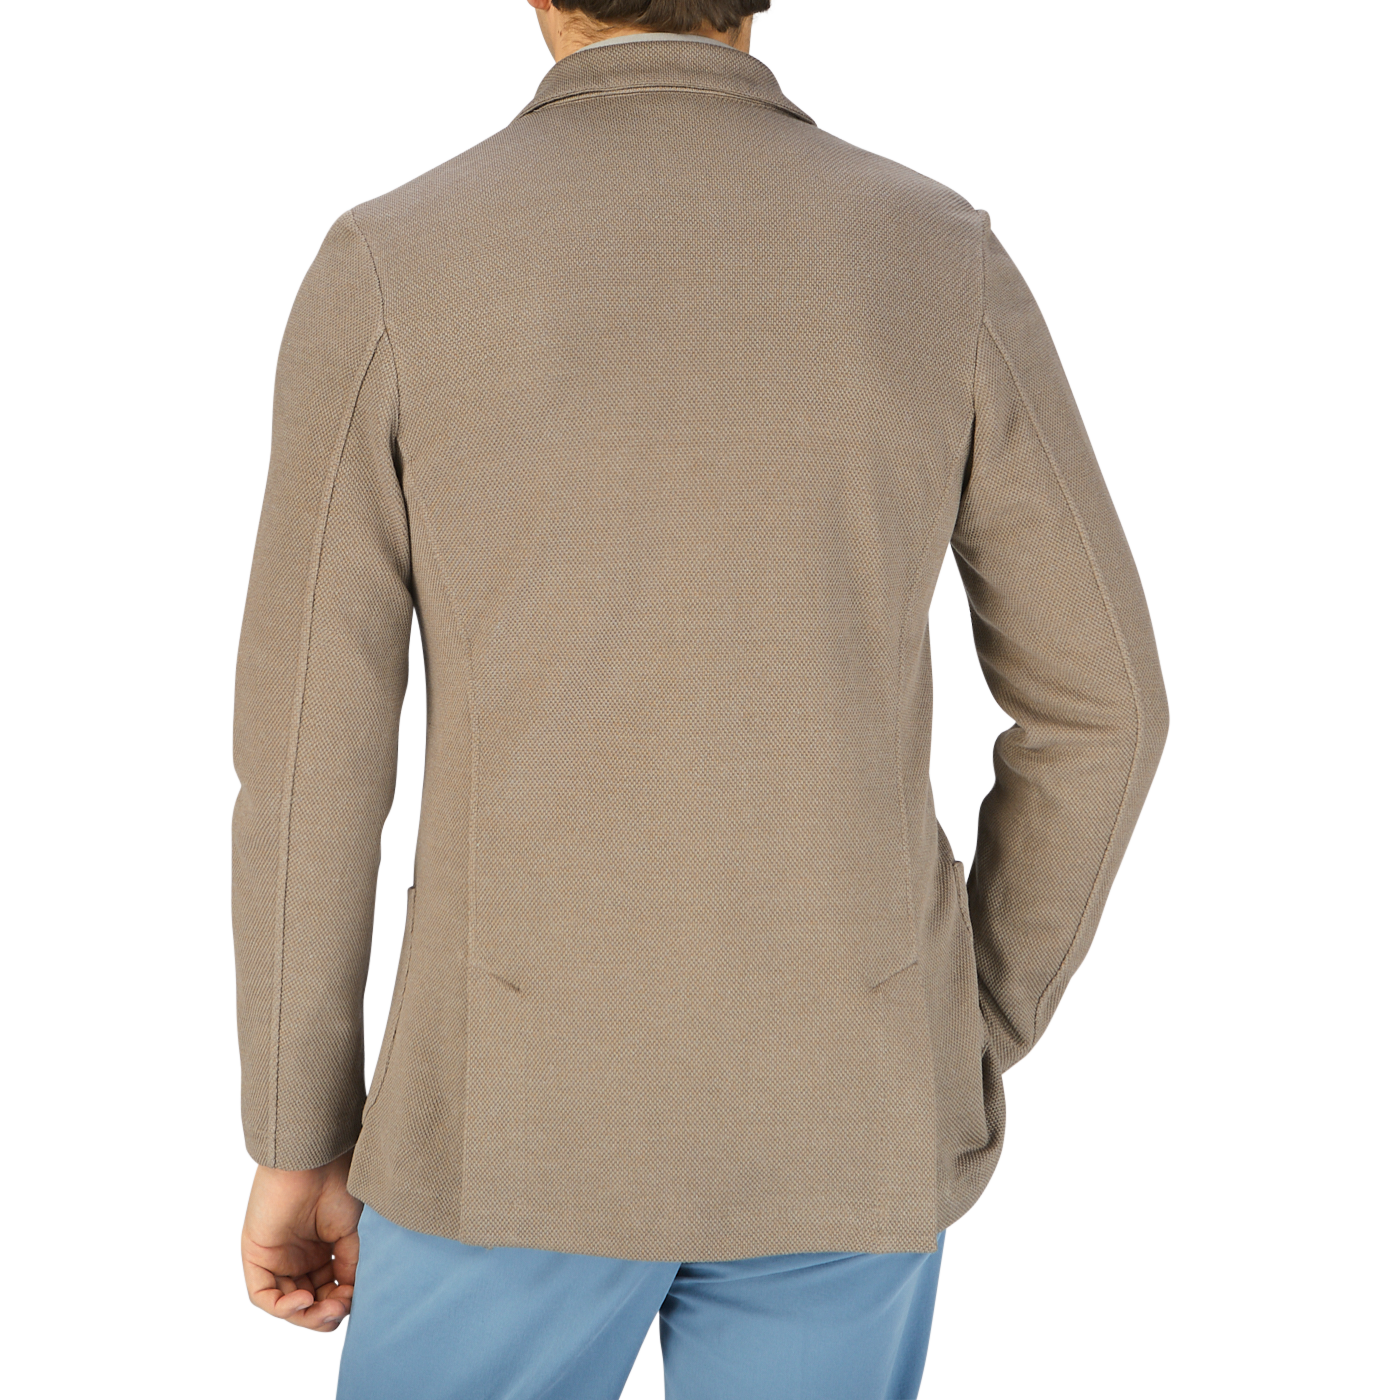 The back view of a man wearing a Gran Sasso Taupe Brown Cotton Linen Knitted Blazer.